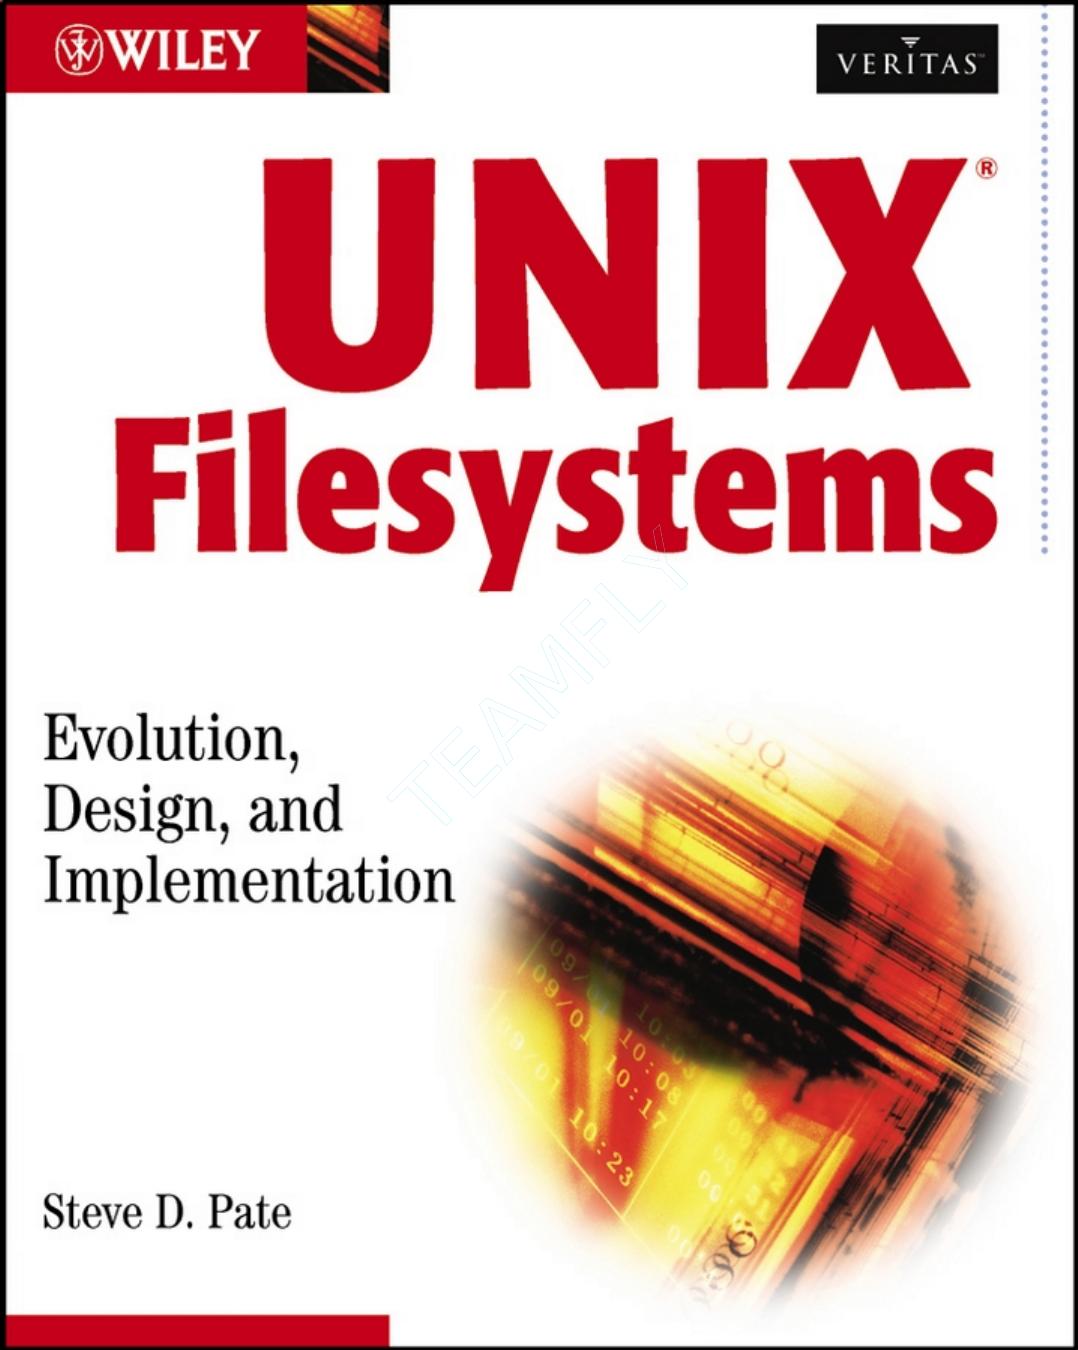 UNIX filesystems: evolution, design, and implementation by Steve D. Pate